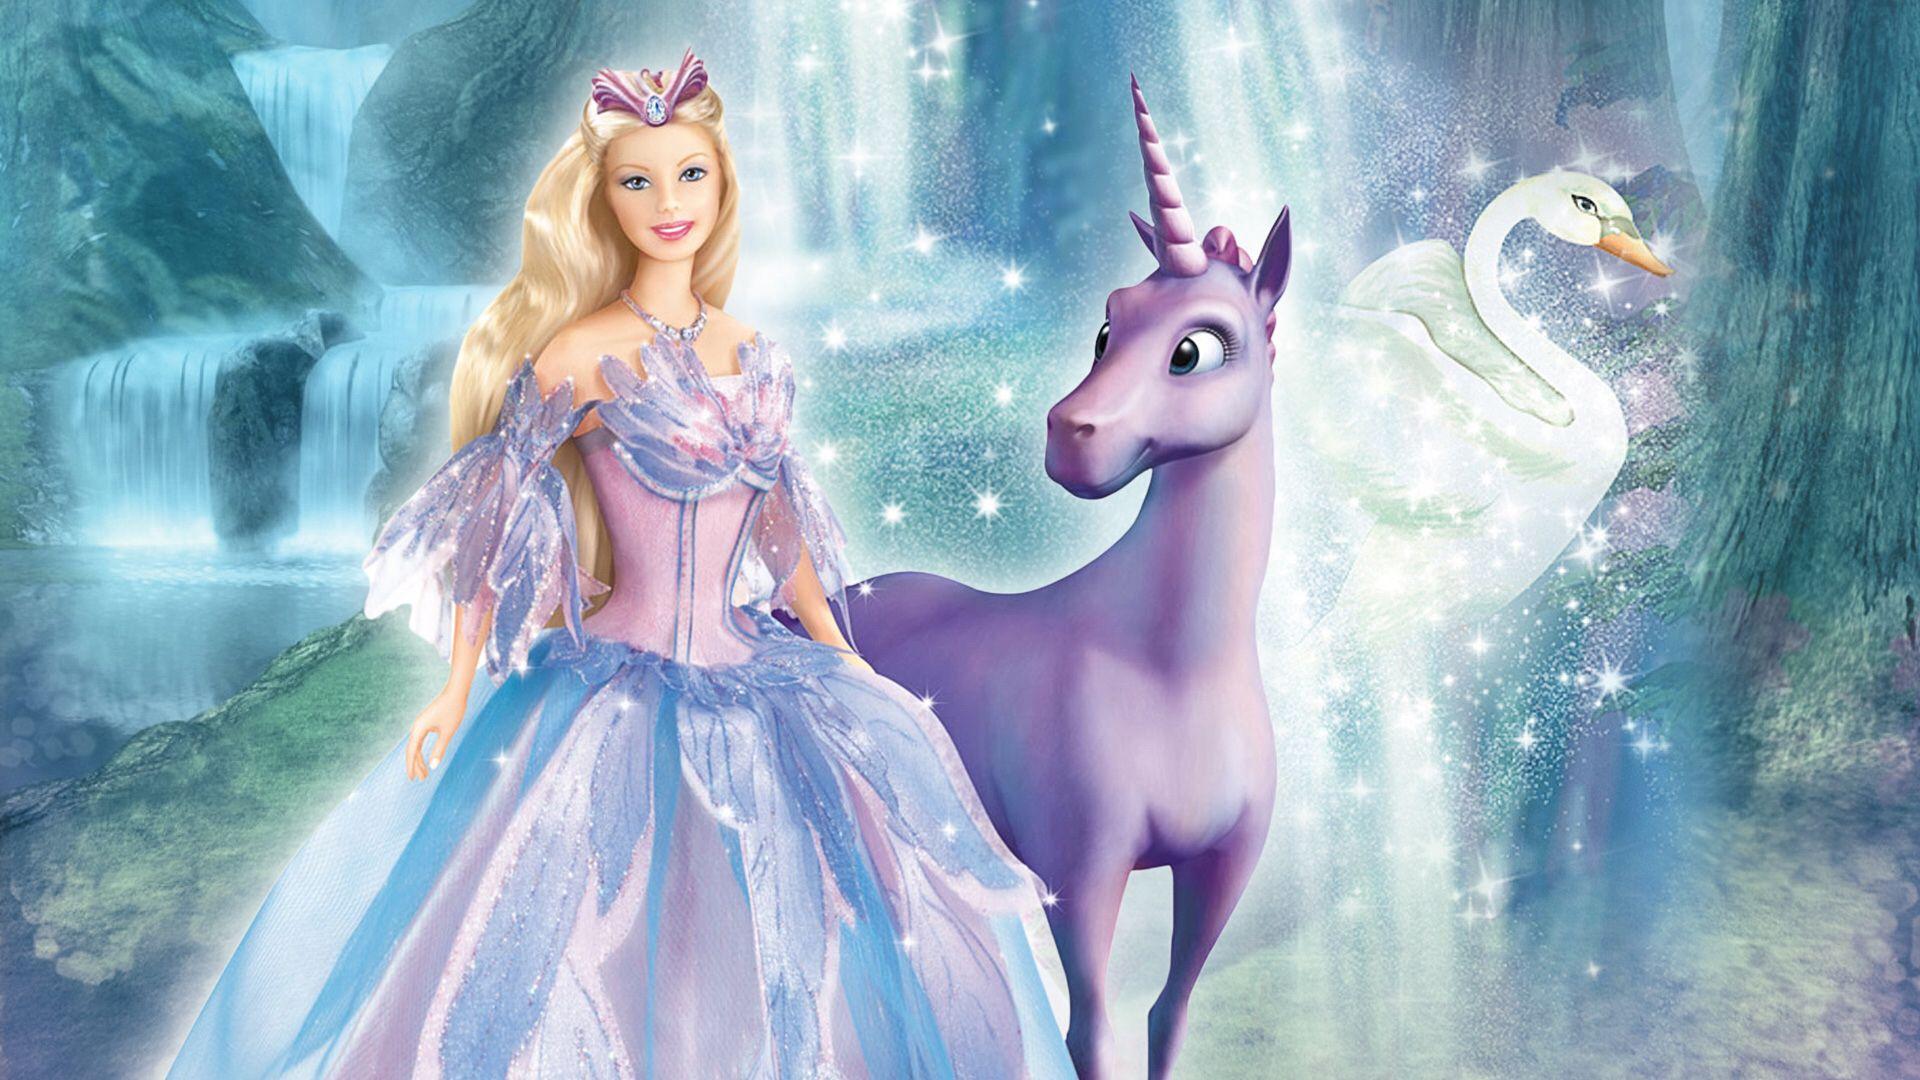 Barbie as the swan princess. (Odette)The Swan Princess in 2019